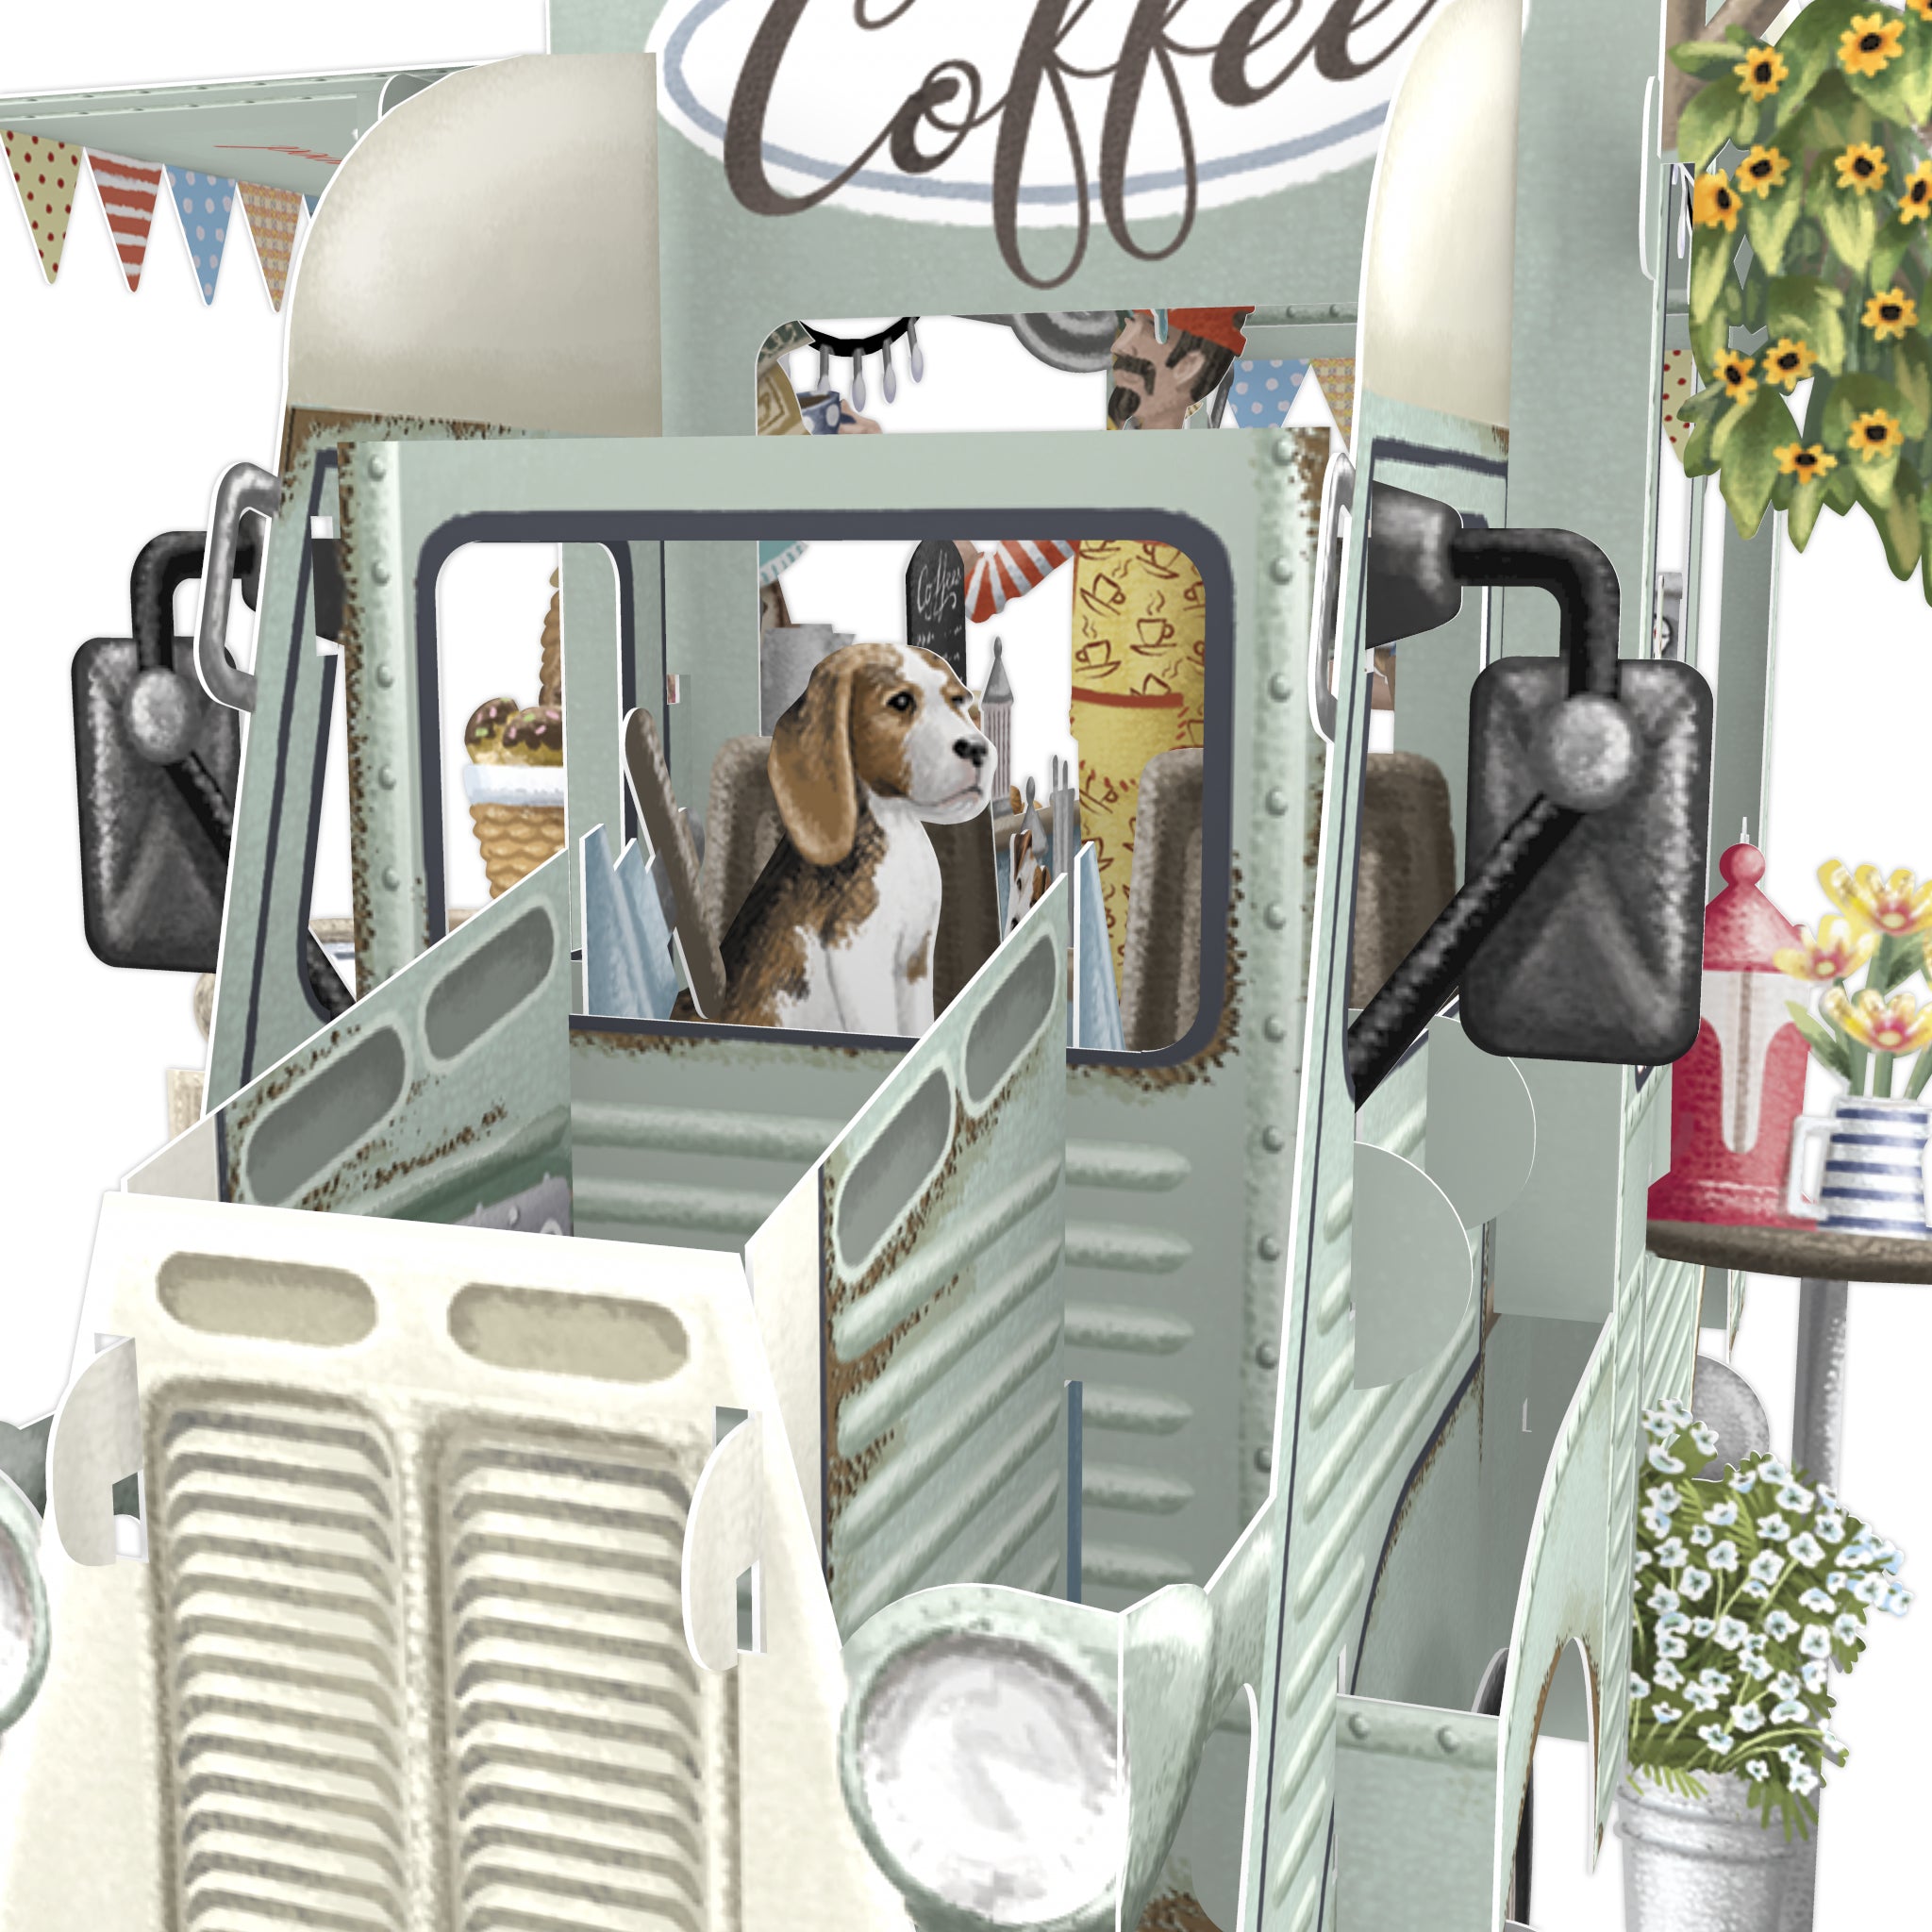 &quot;Coffee Truck&quot; - 3D Pop Up Greetings Card